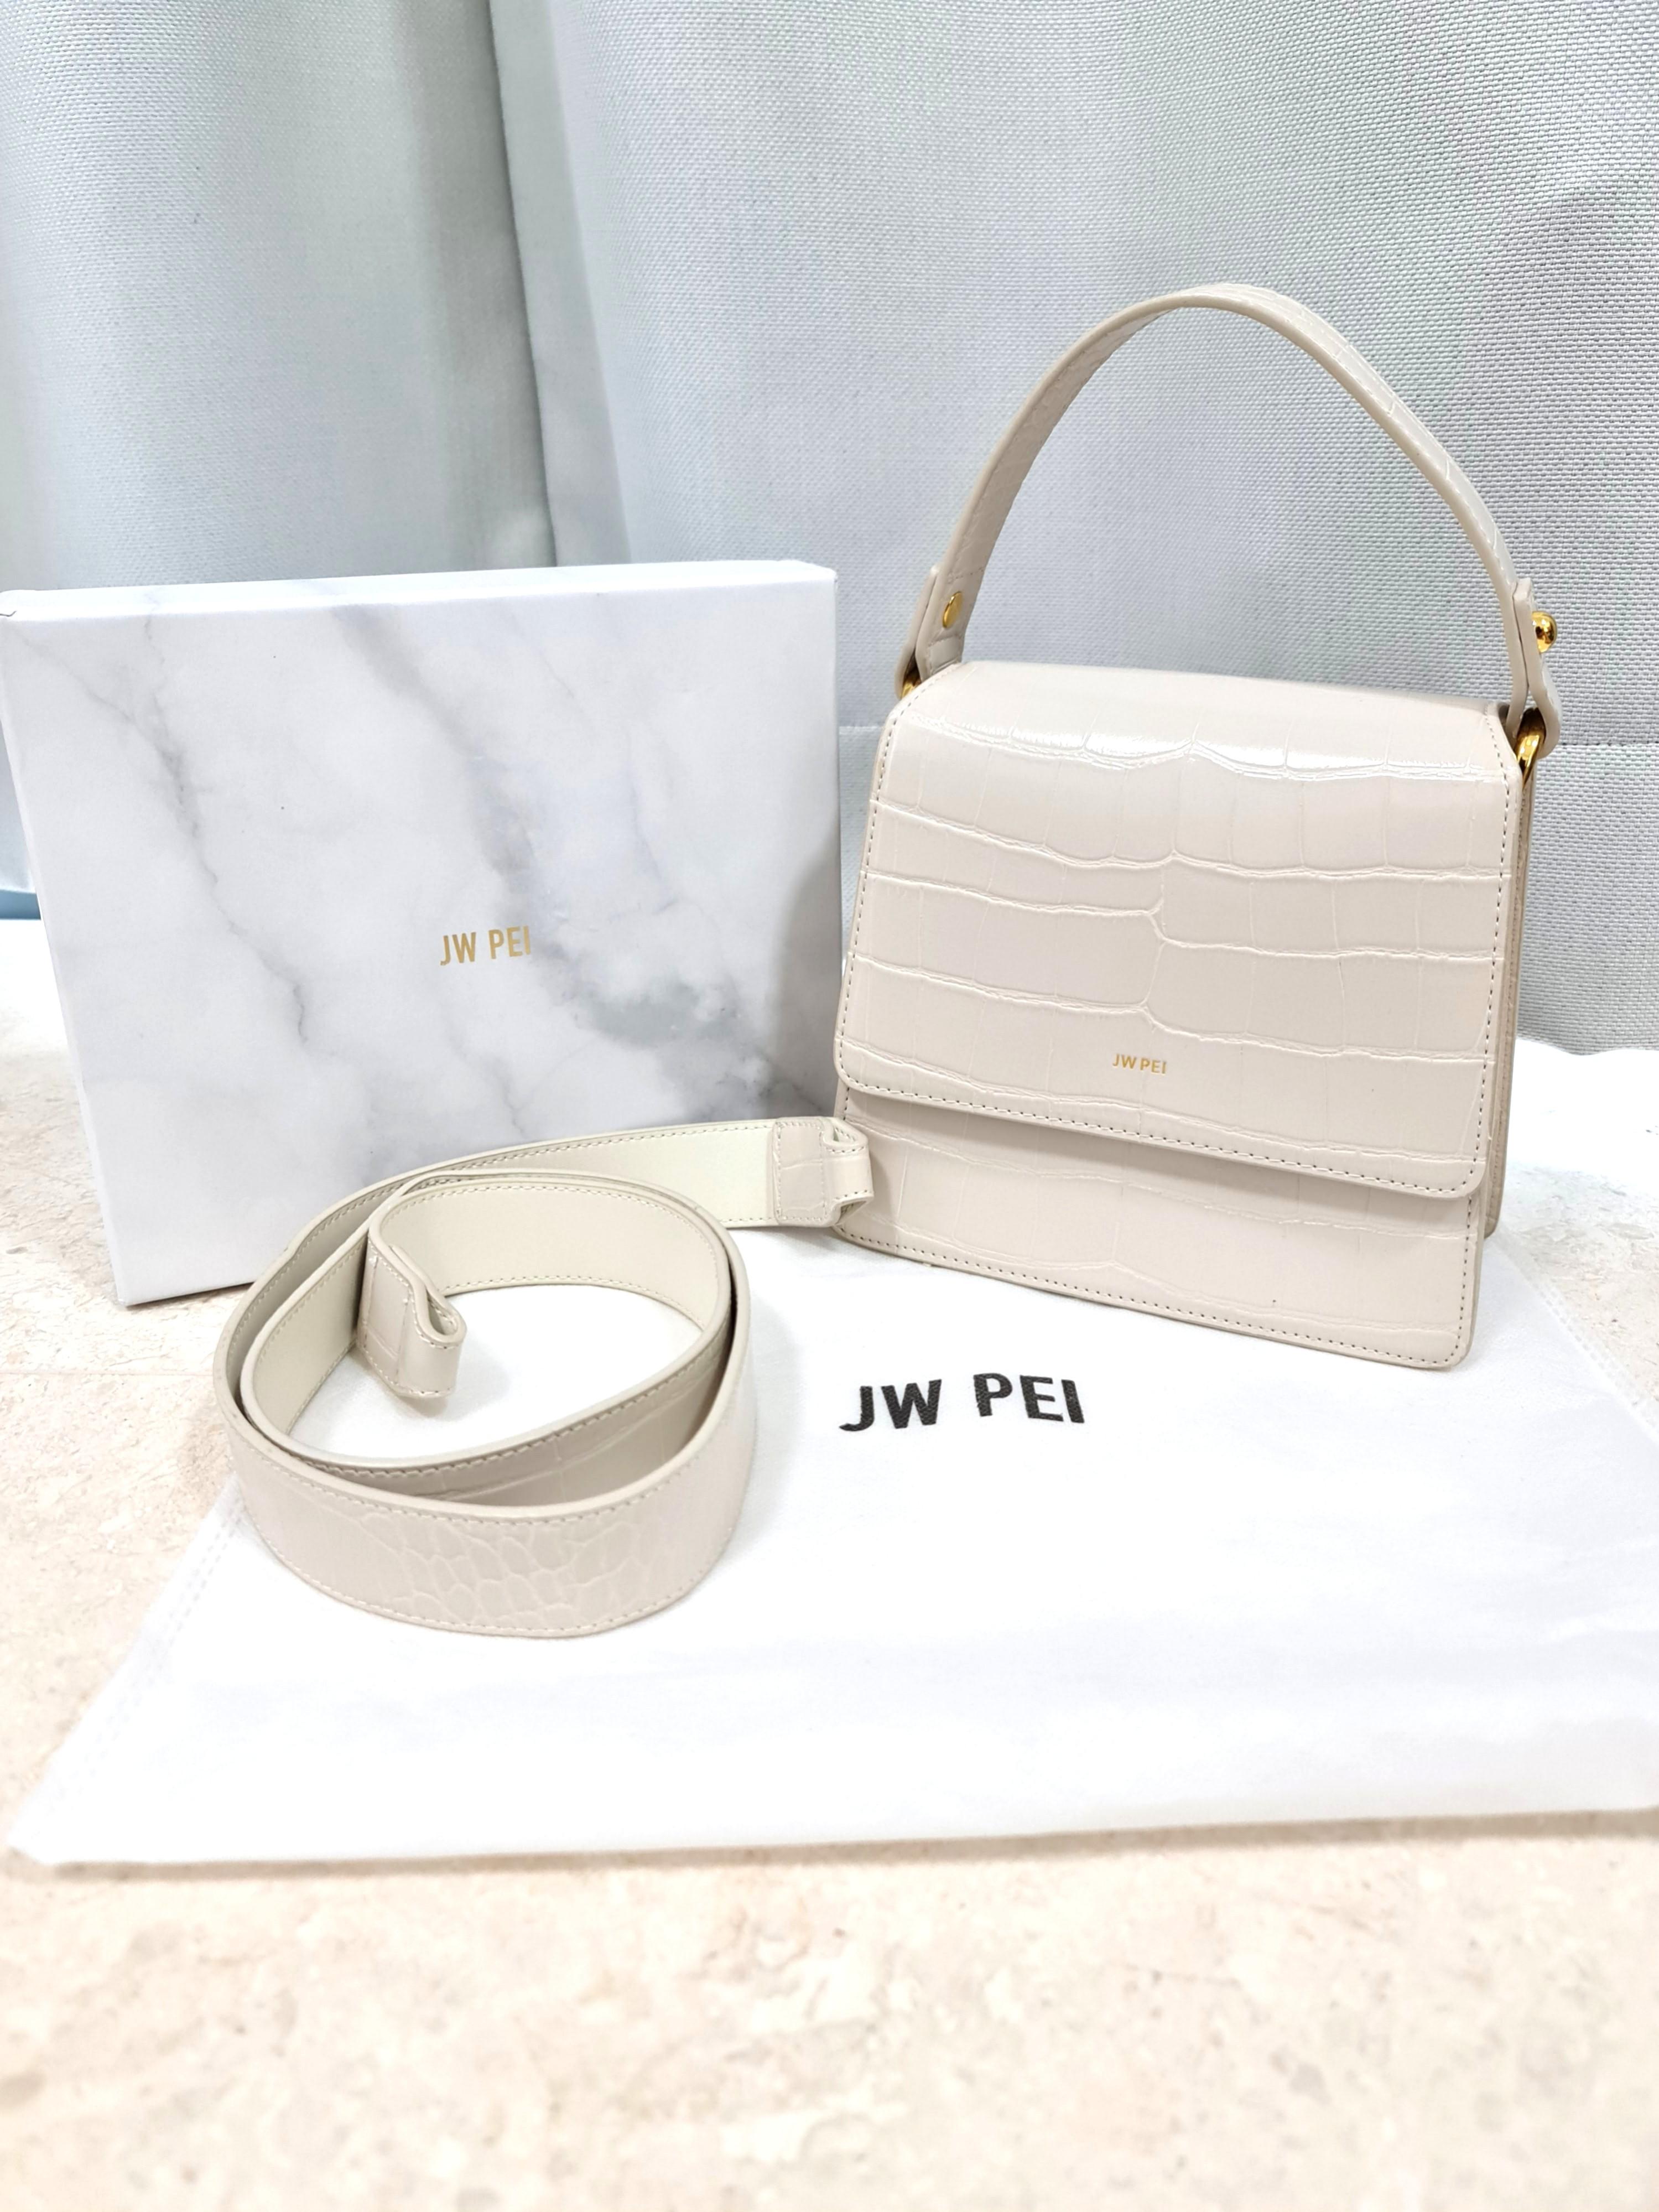 JW PEI Unboxing and Review, What Fits Inside The Bag